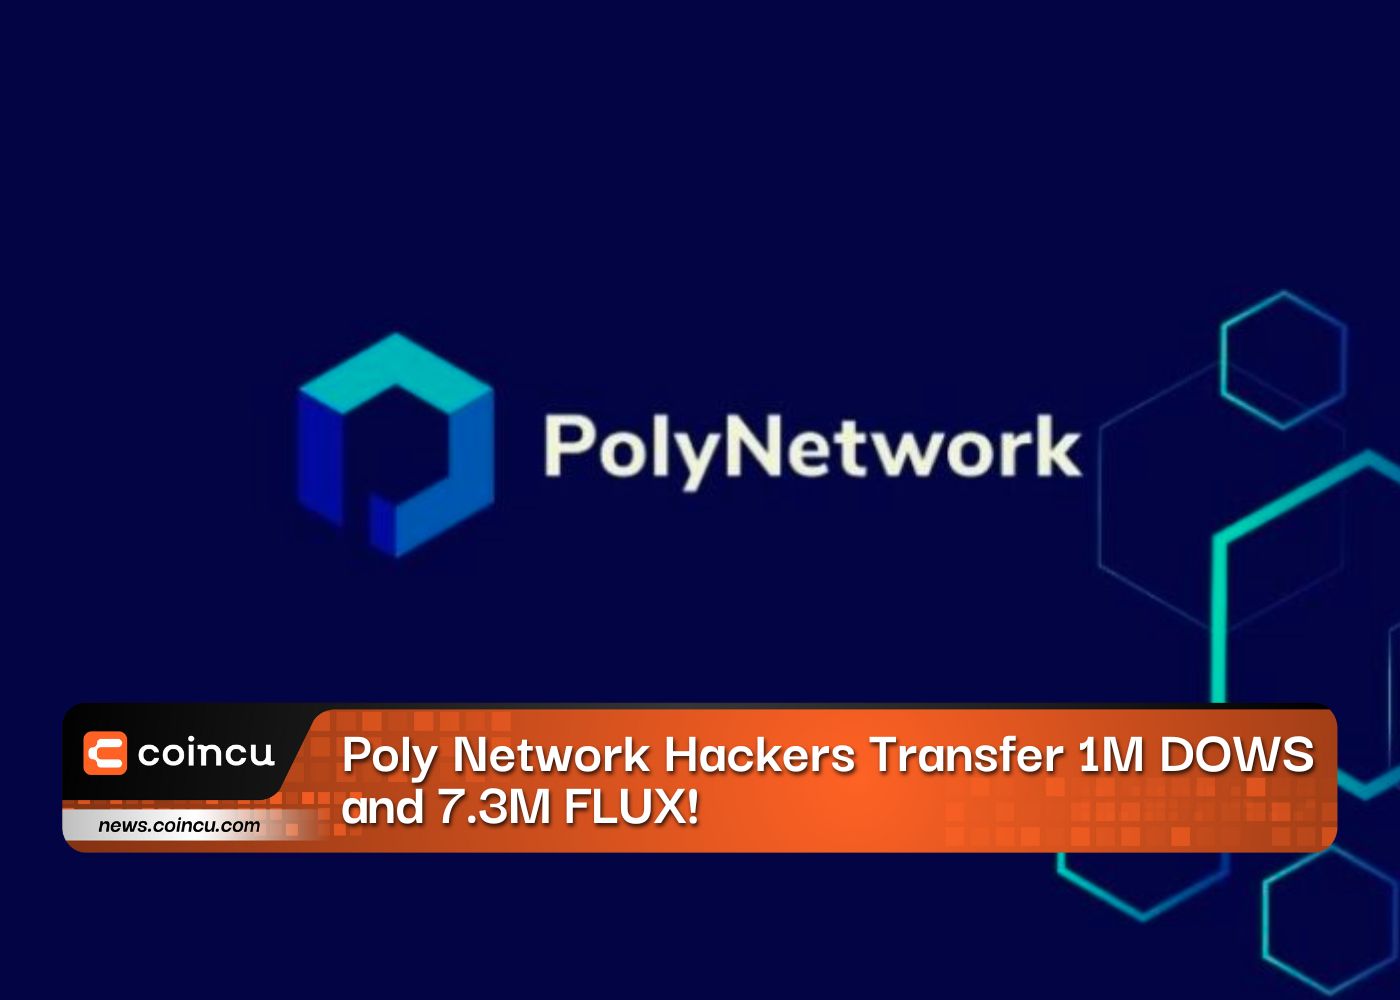 Poly Network Hackers Transfer 1M DOWS and 7.3M FLUX!